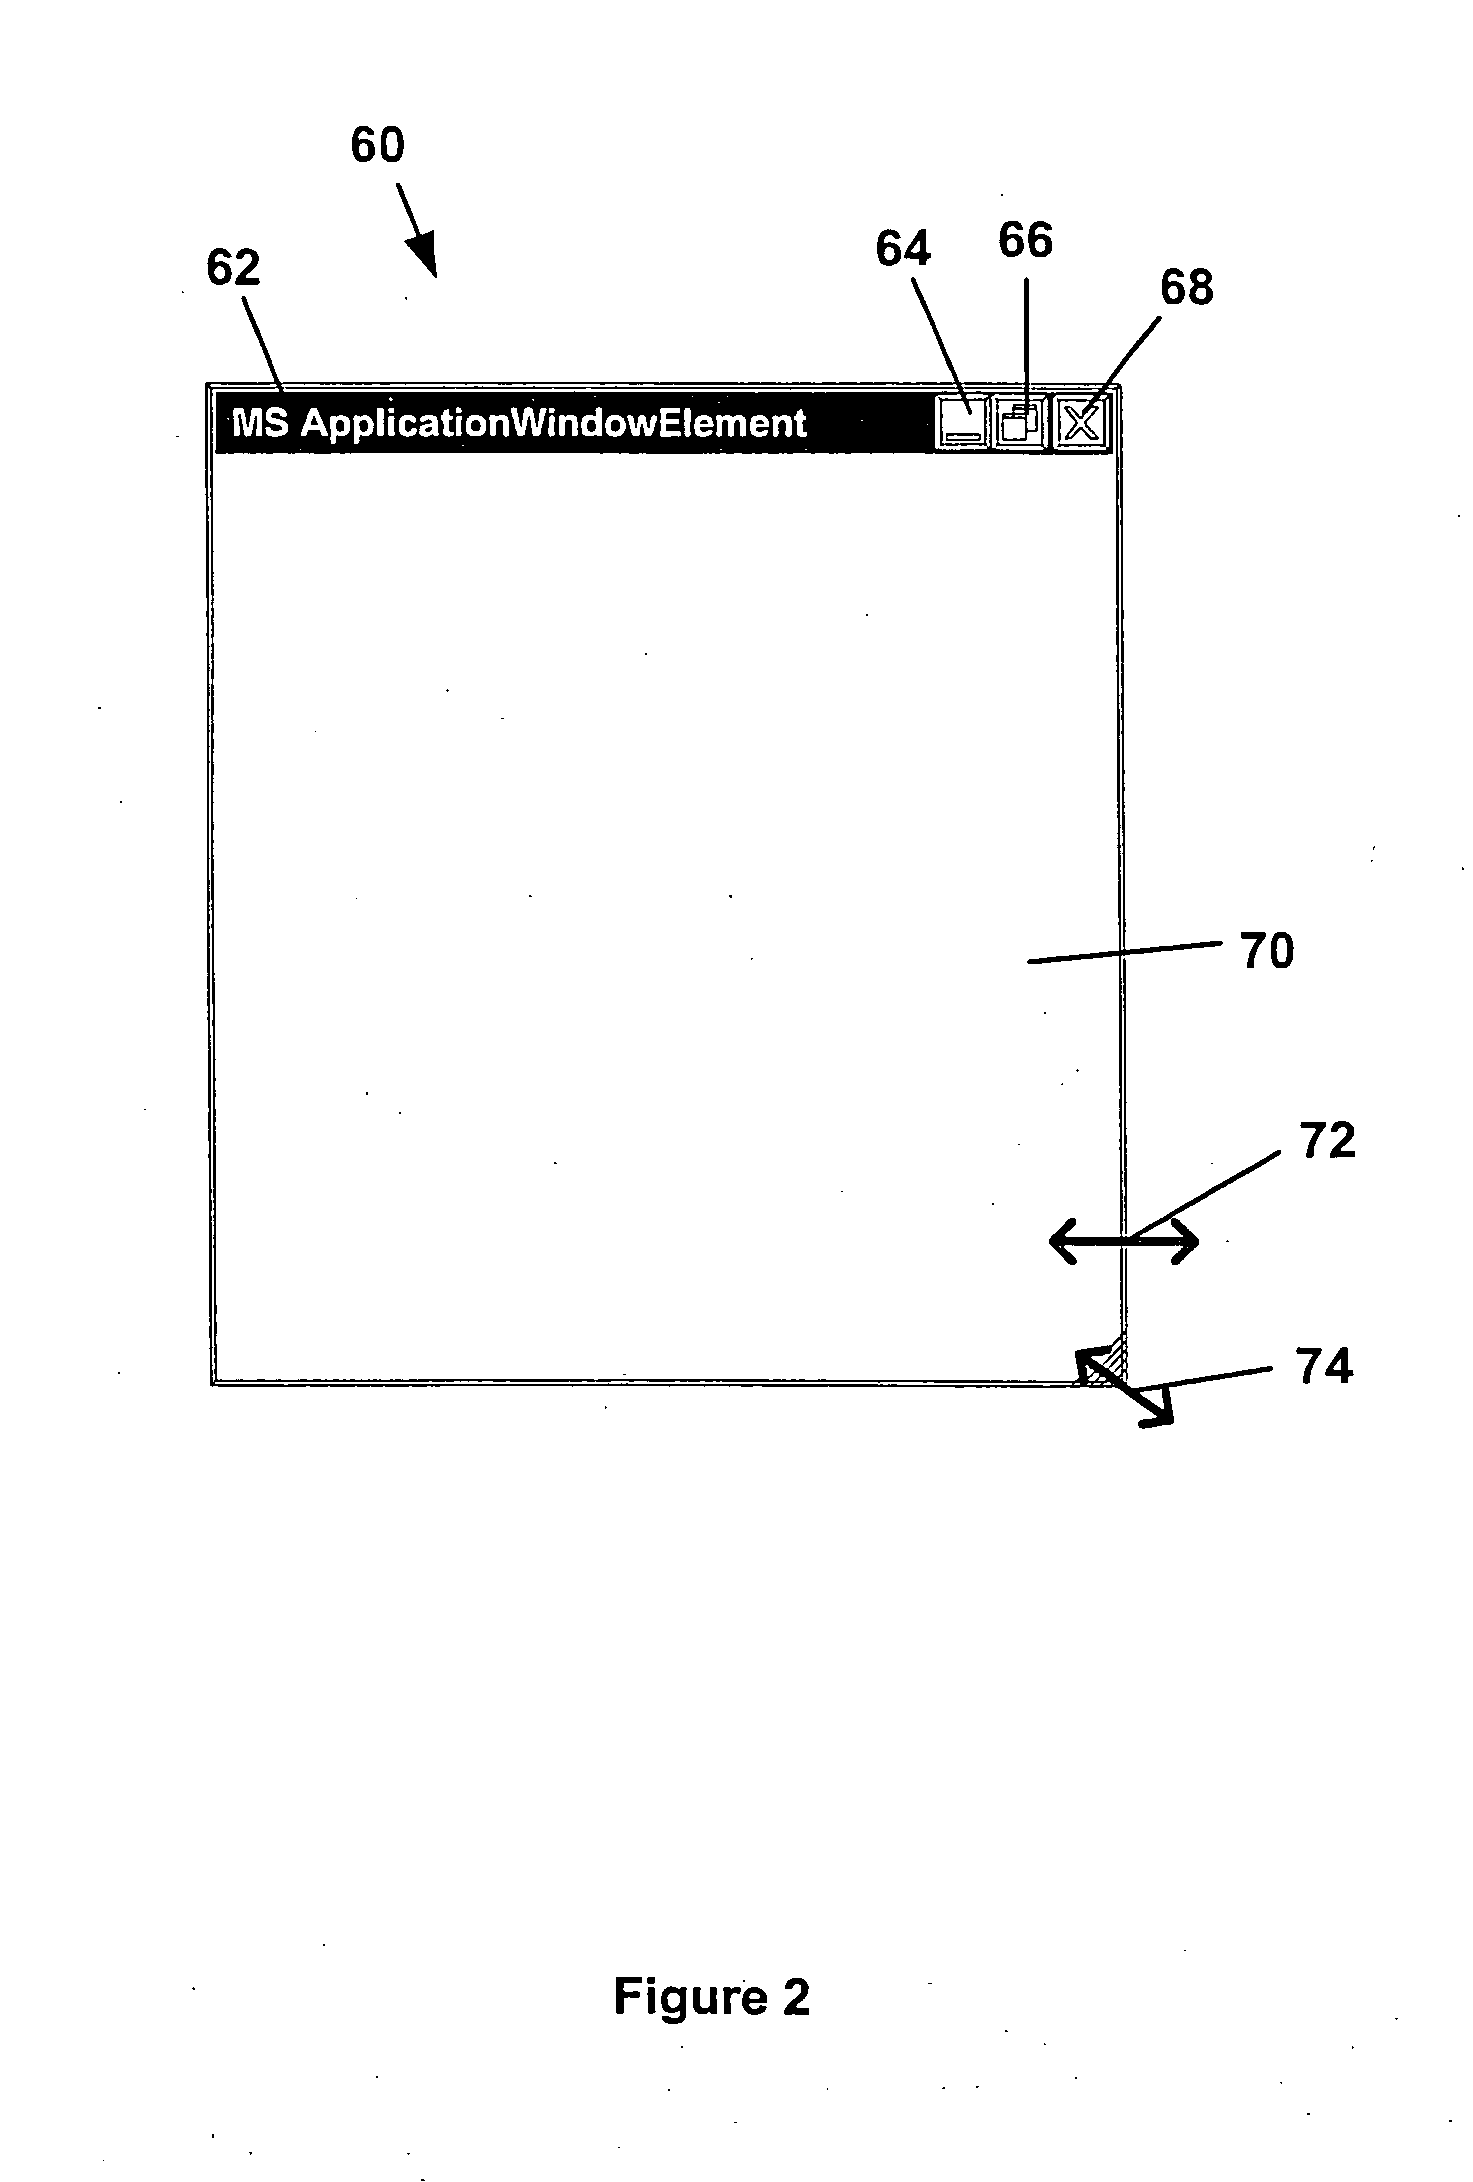 Responsive user interface to manage a non-responsive application